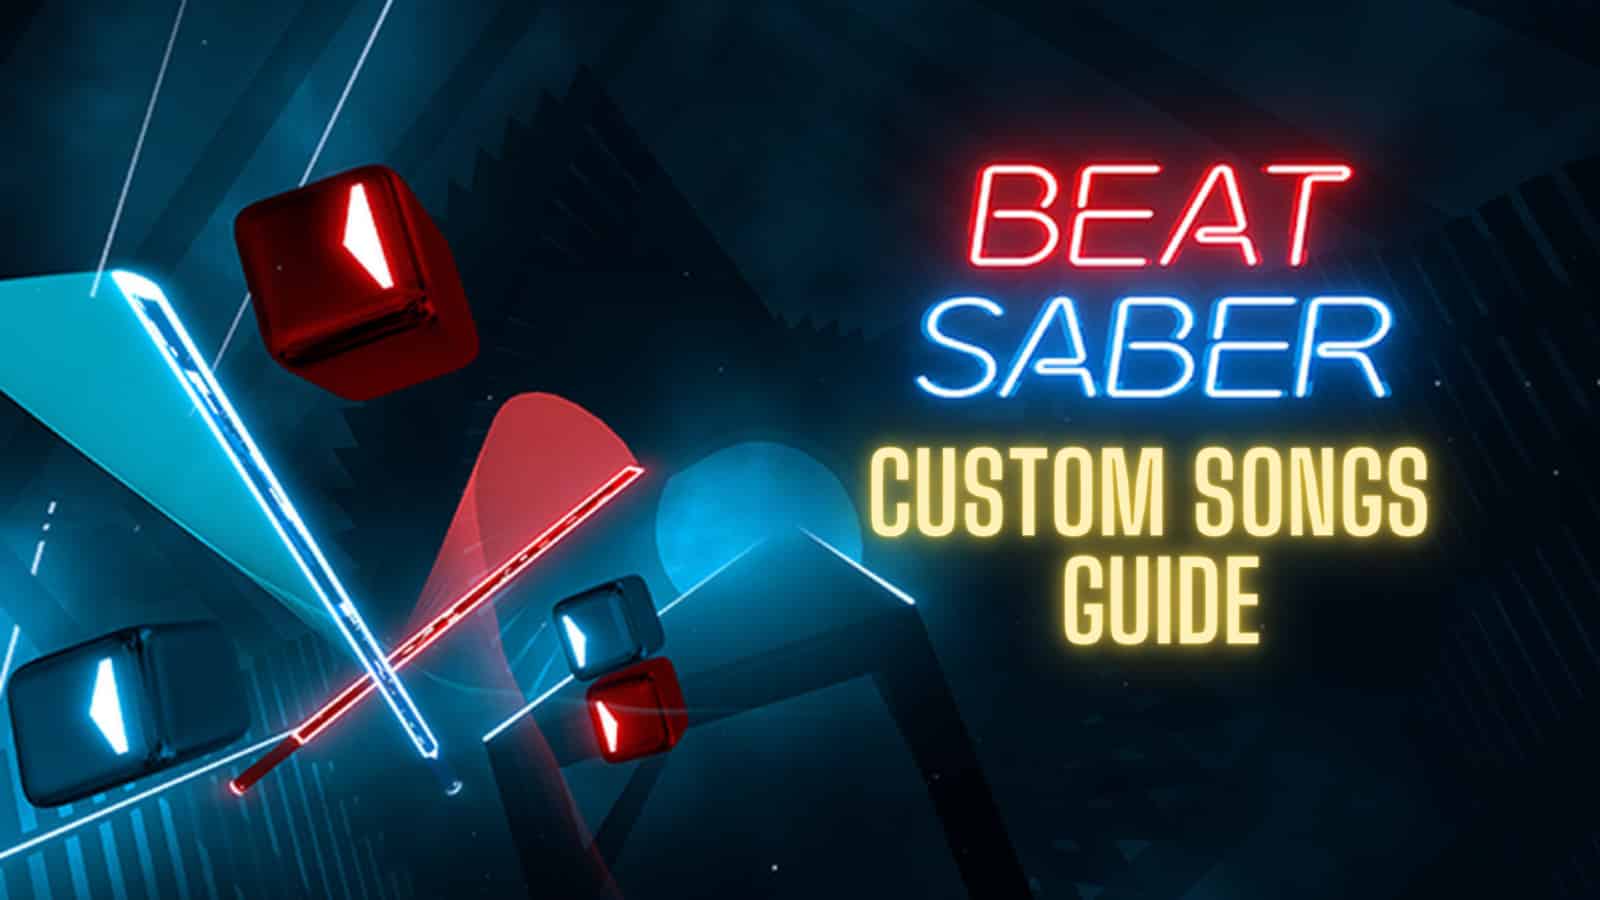 How to download beat saber songs acting for dummies pdf download